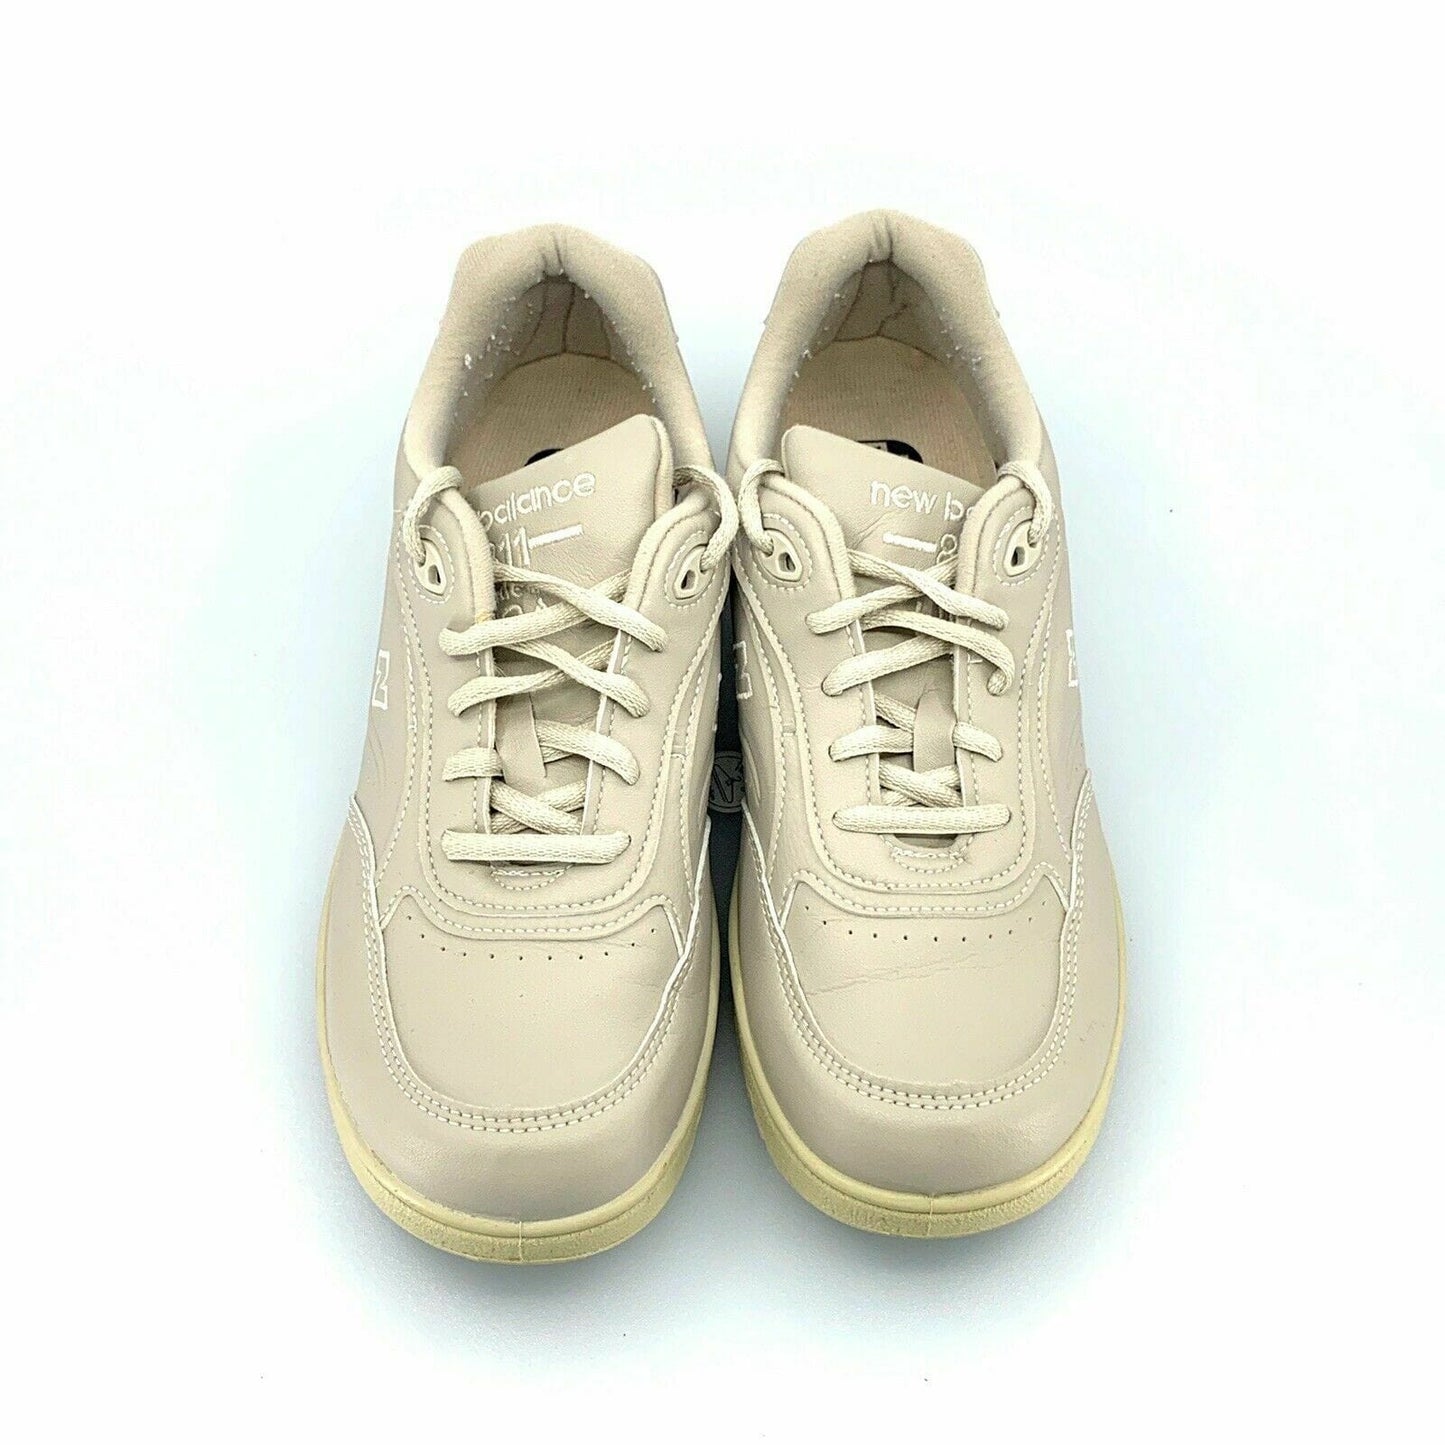 New Balance Womens 811 Rollbar Sneakers Shoes Beige Lace Up Size 6.5 B WW811BE - parsimonyshoppes